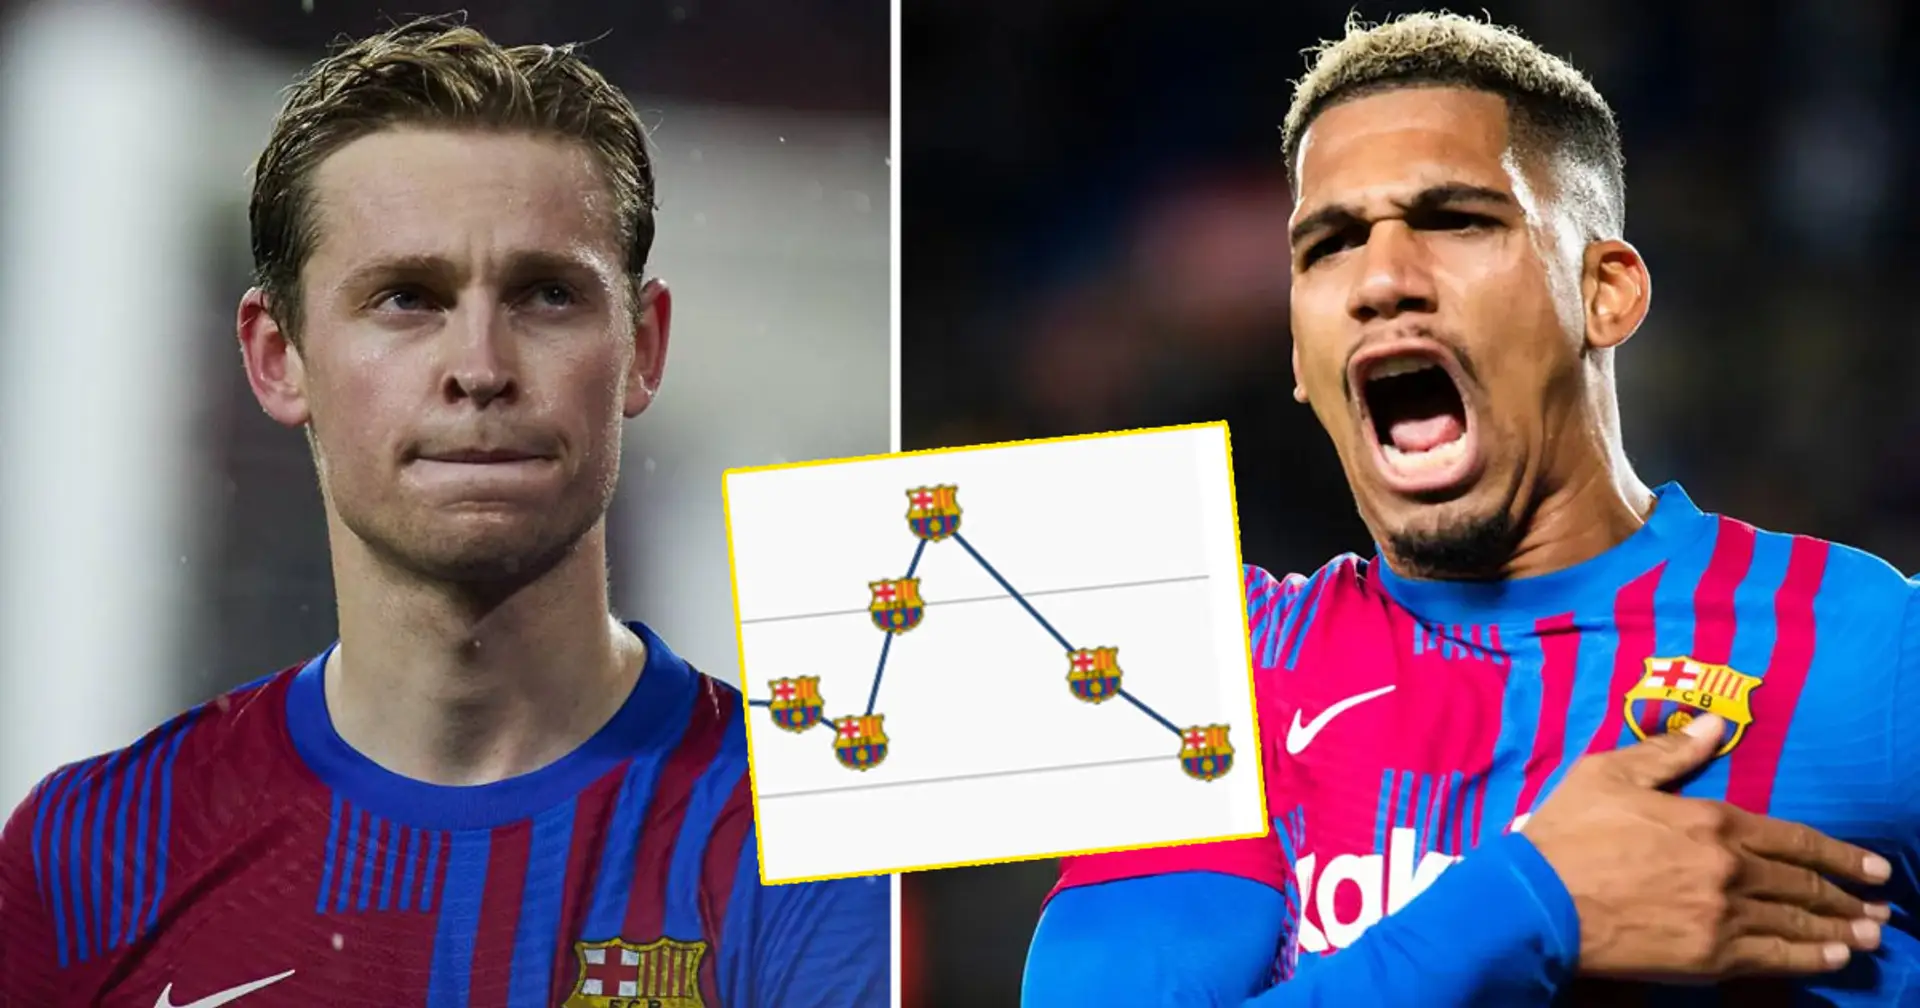 Frenkie and 13 others lose in value, one player improves: market value update at Barca